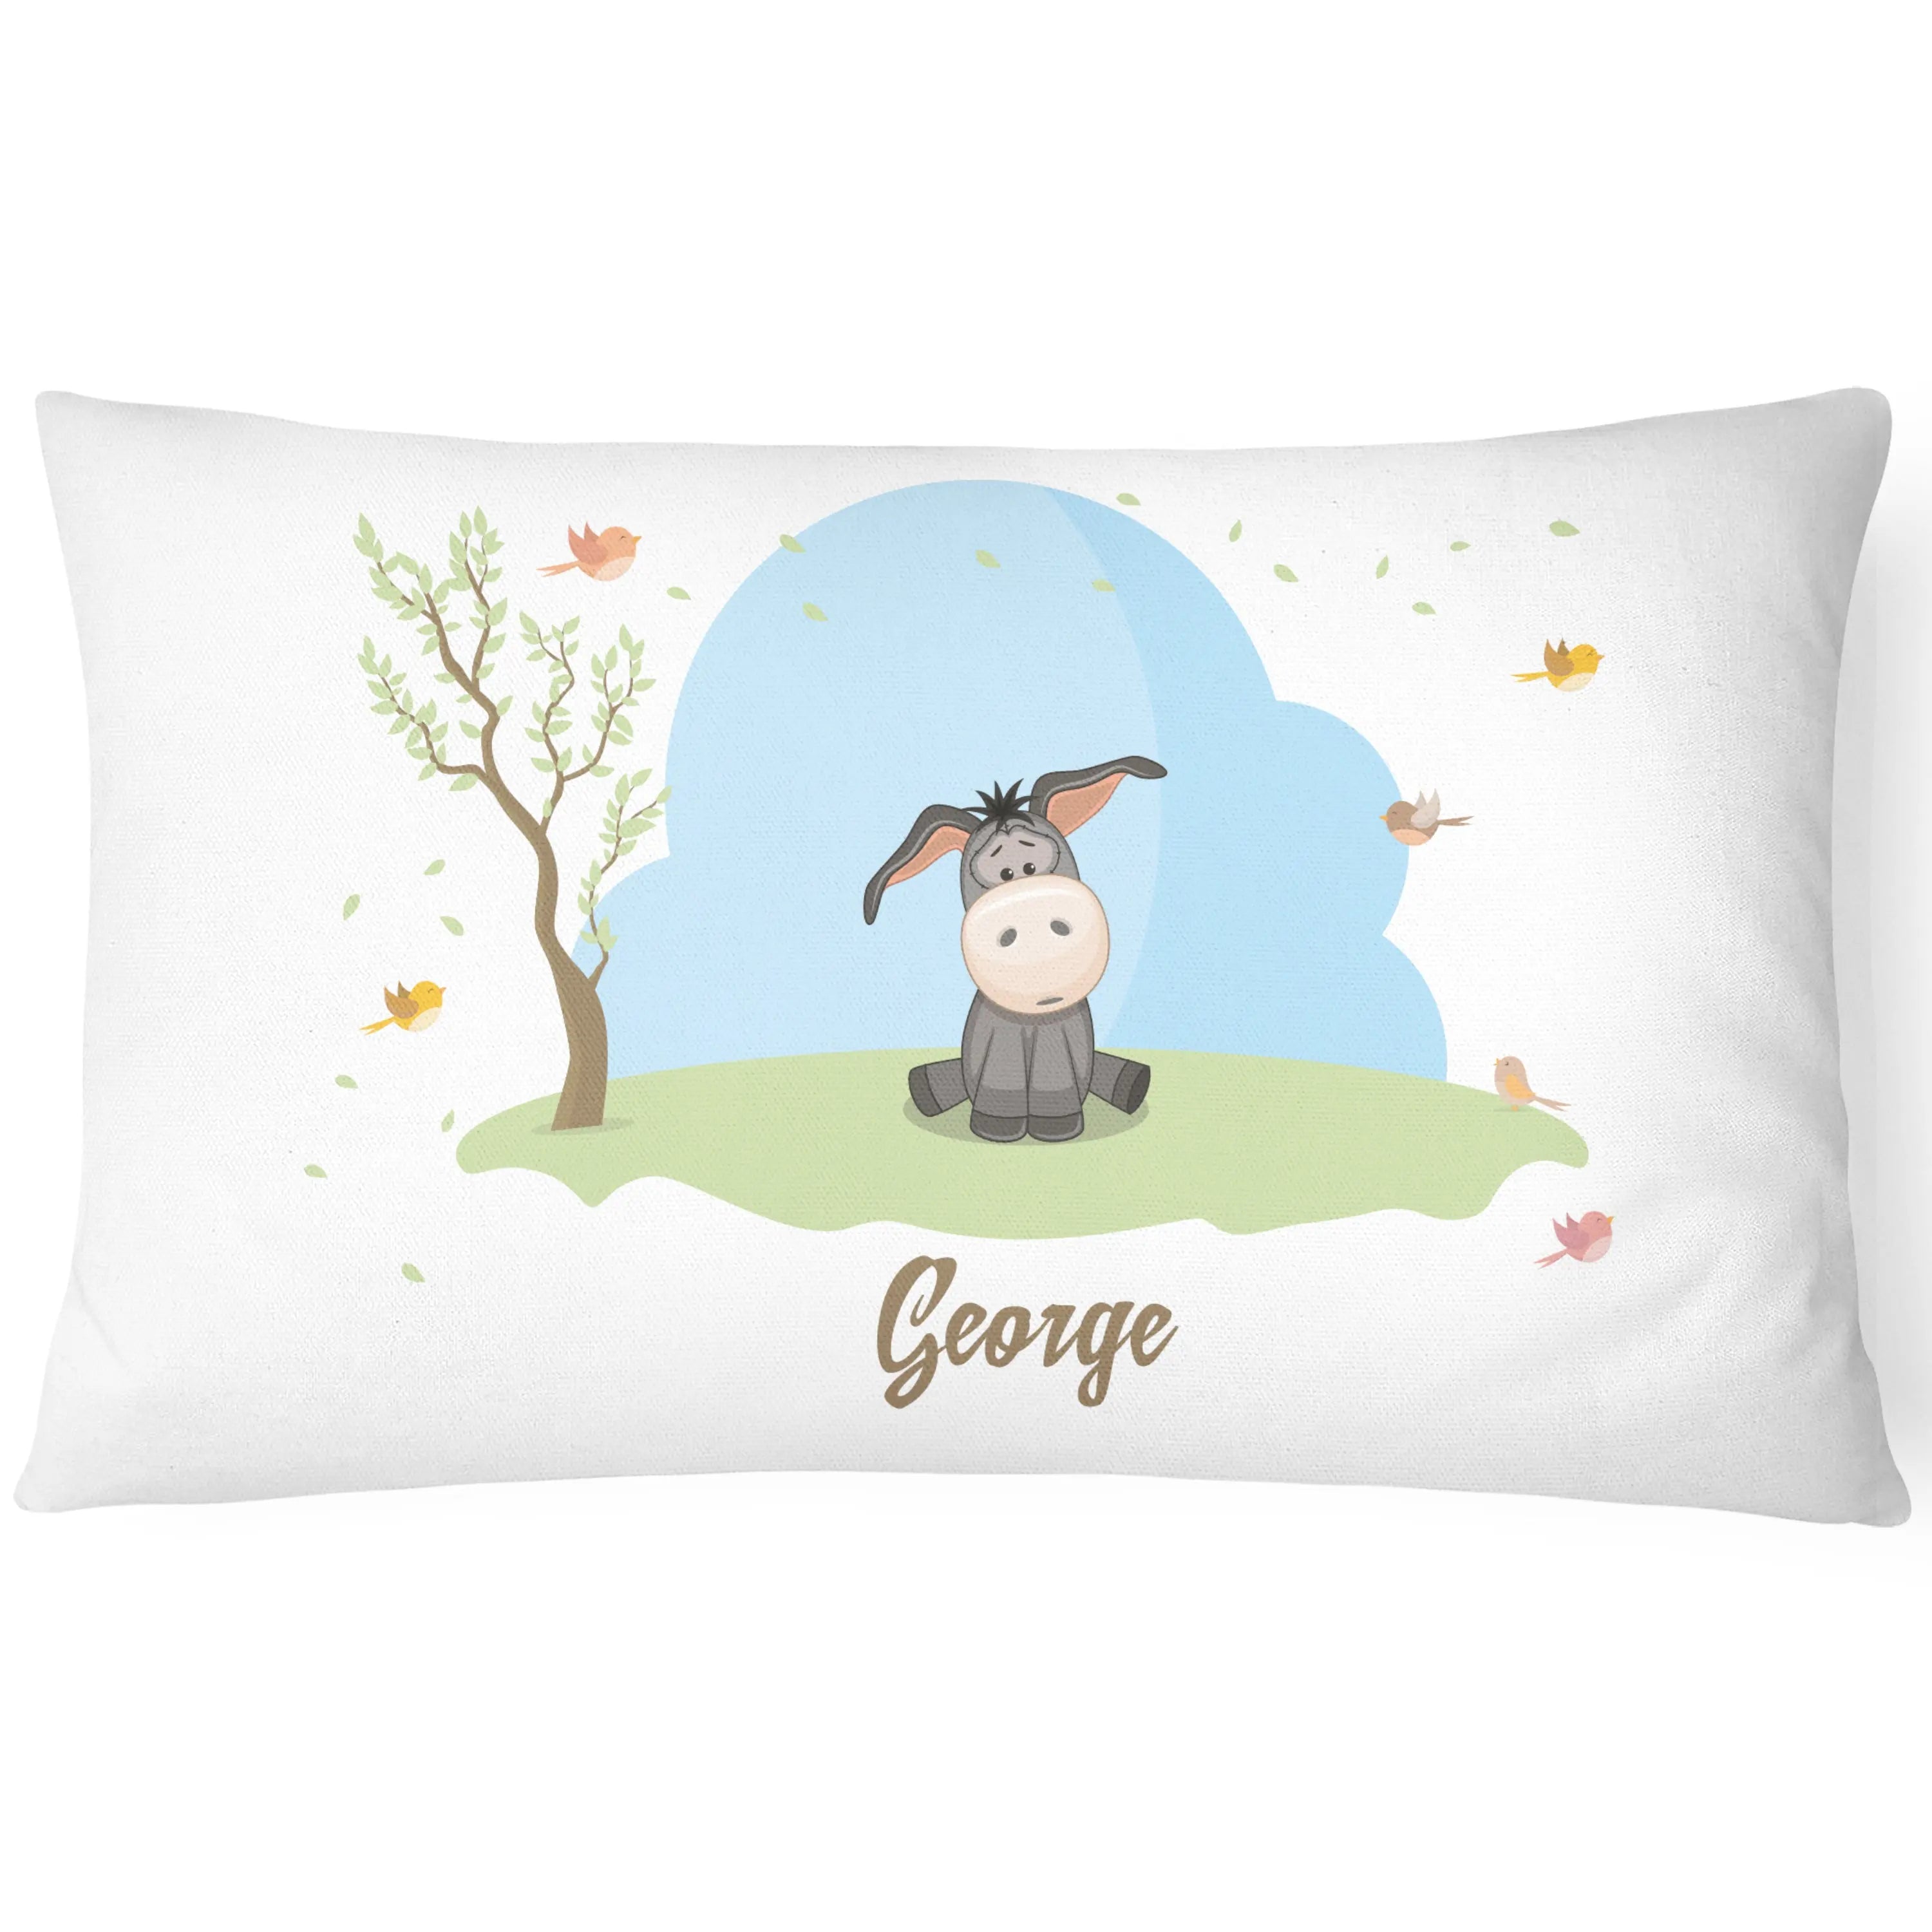 Personalised Children's Pillowcase Cute Animal - Endearing